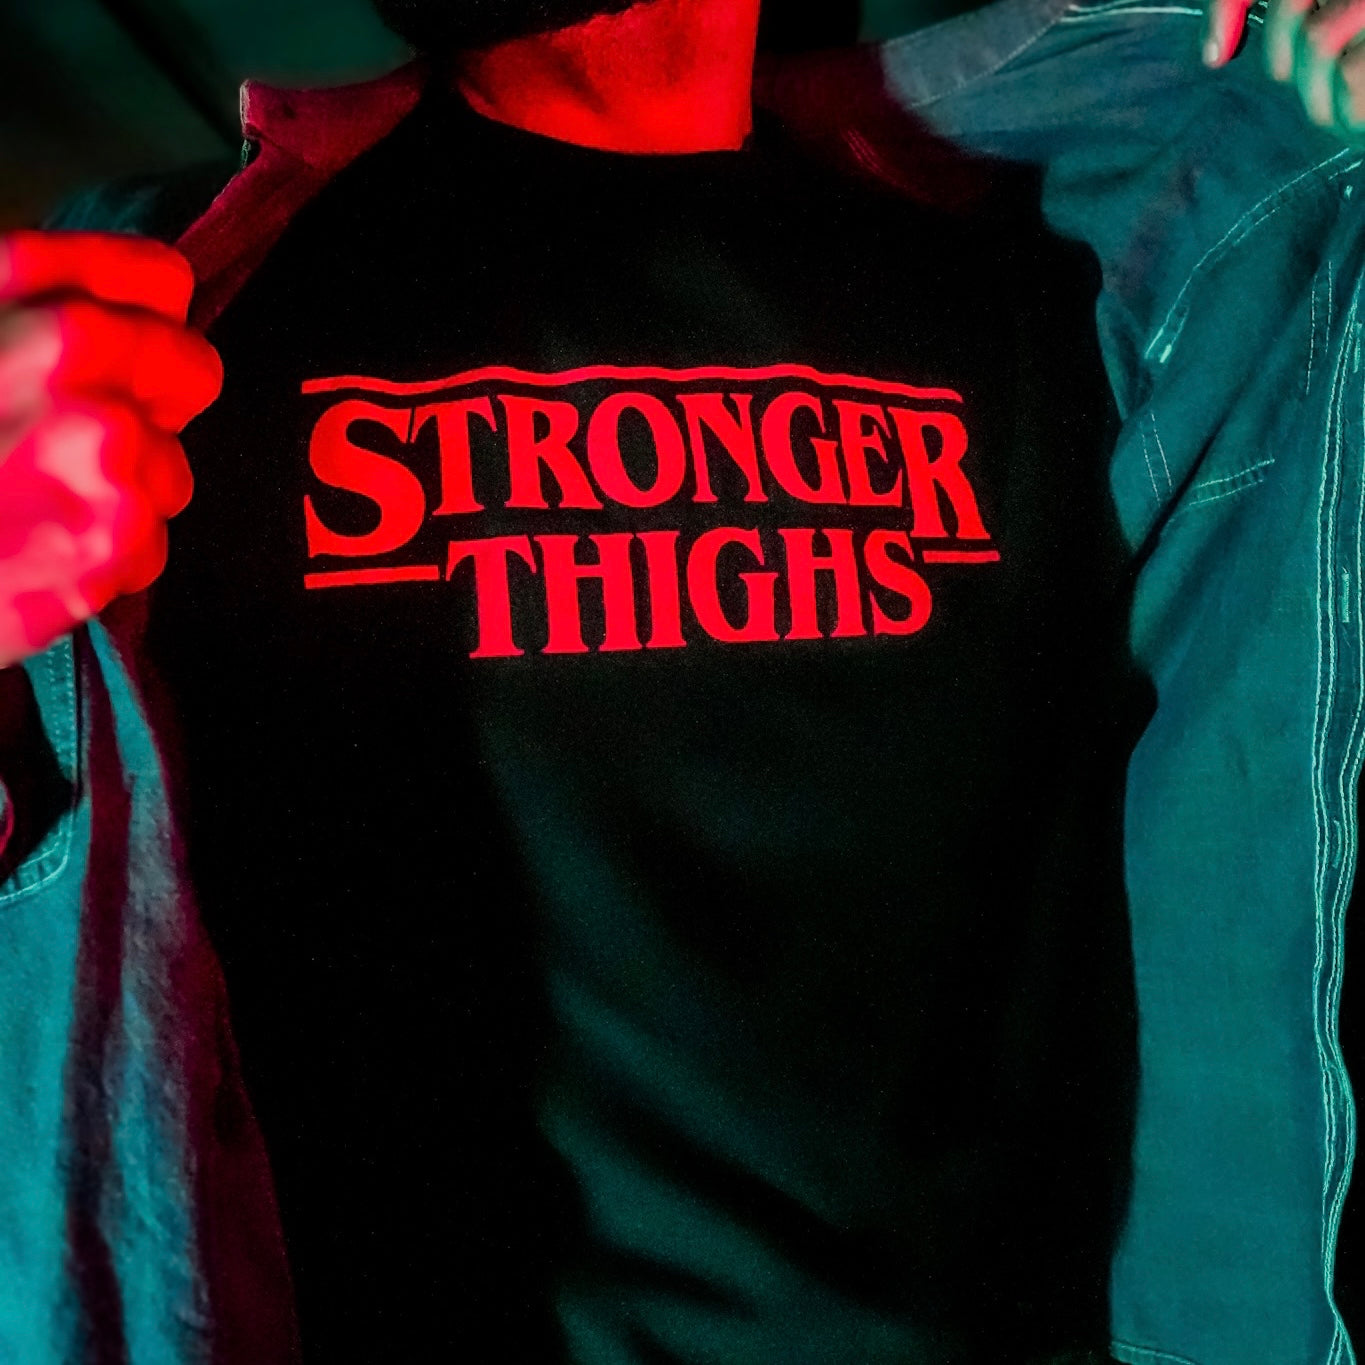 “Stronger Thighs" - Tee